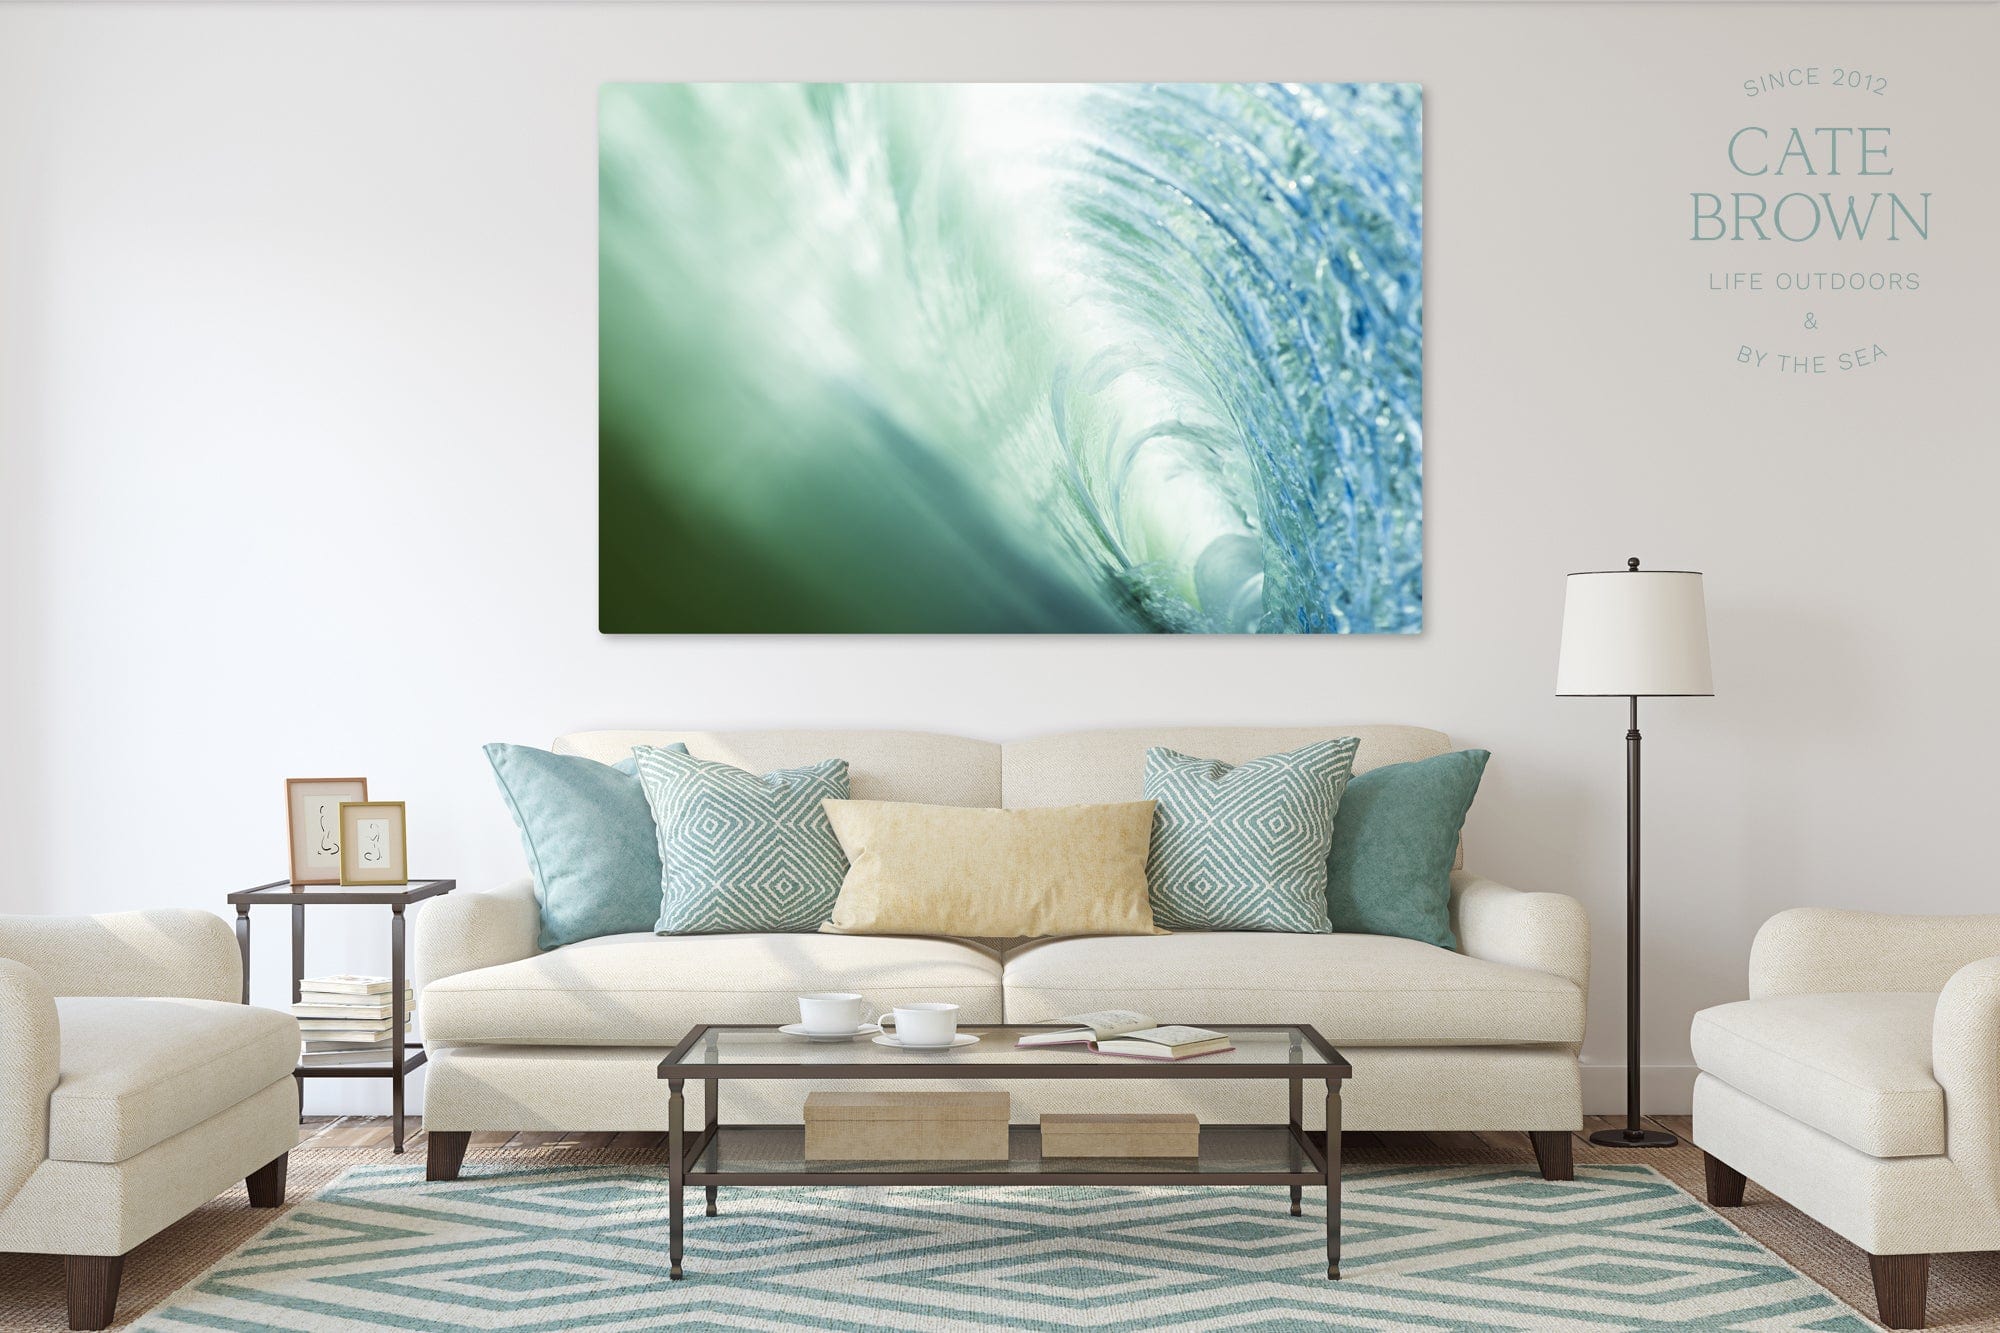 Cate Brown Photo Canvas / 16"x24" / None (Print Only) Aqua Vision  //  Ocean Photography Made to Order Ocean Fine Art